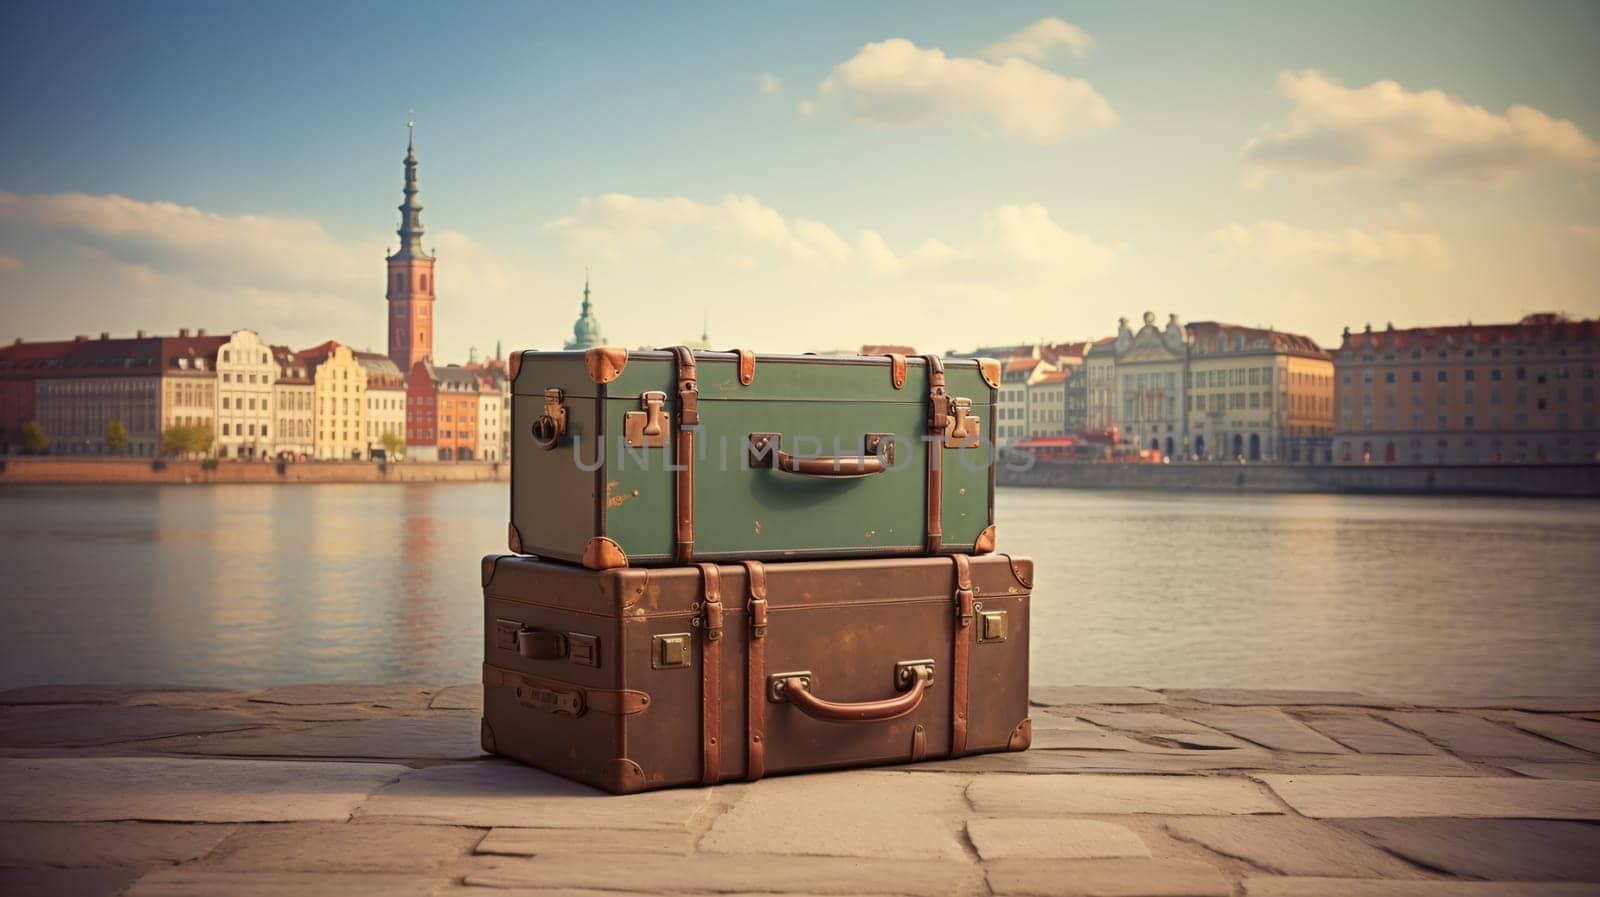 Vintage Suitcases by Waterfront on Sunny Day by chrisroll